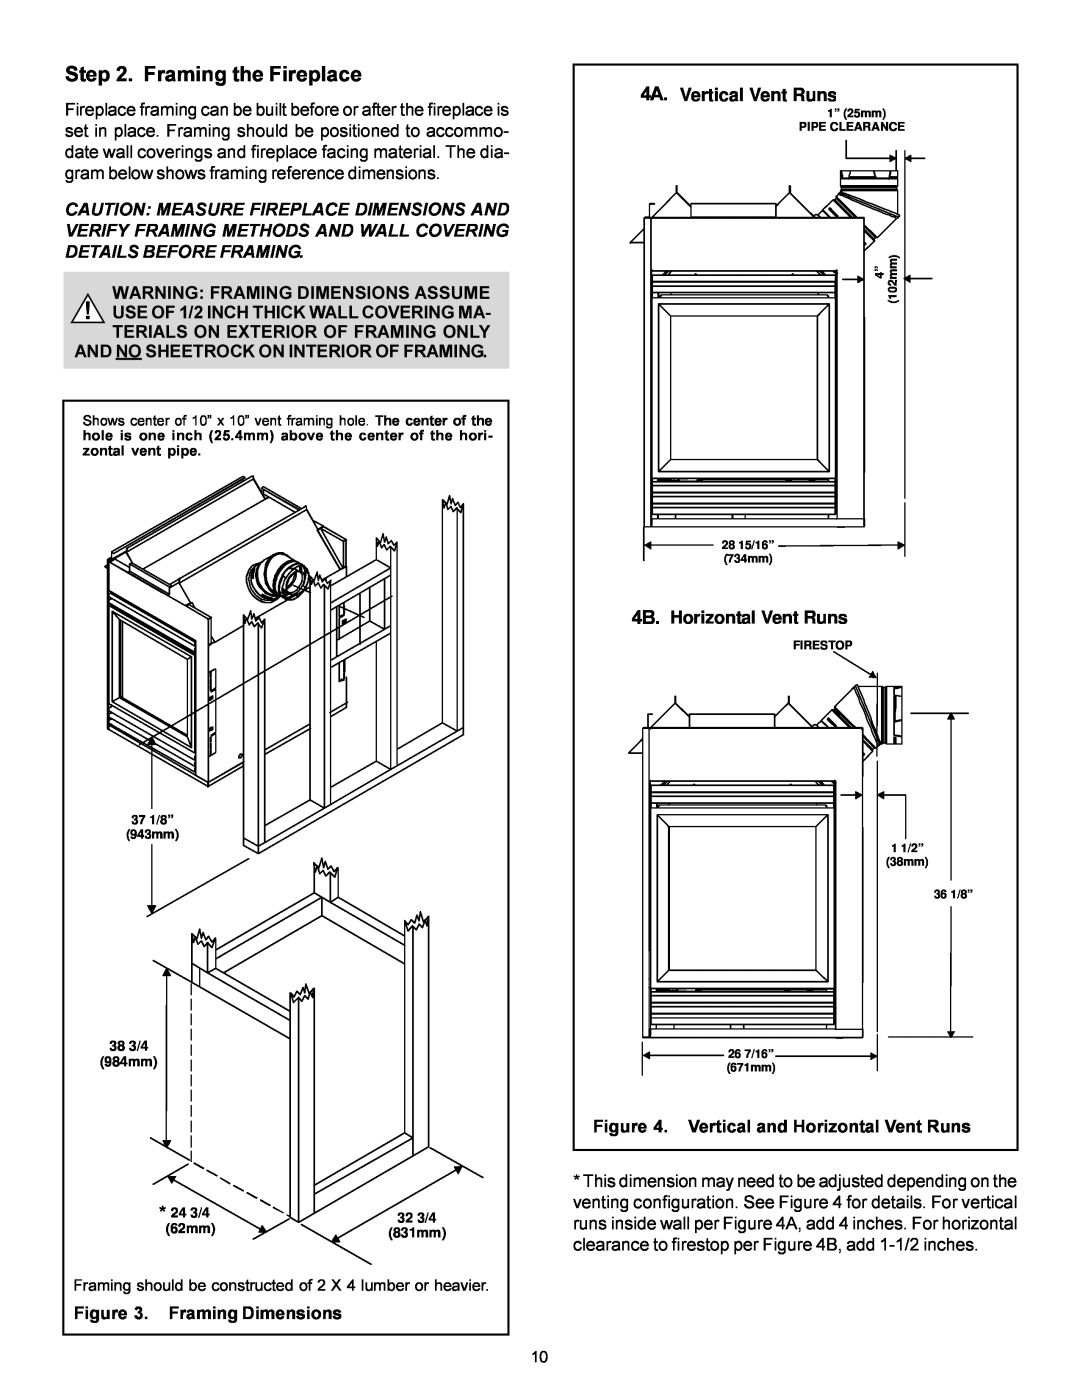 Heat & Glo LifeStyle BAY-38HV manual Framing the Fireplace, Warning Framing Dimensions Assume, Vertical Vent Runs 